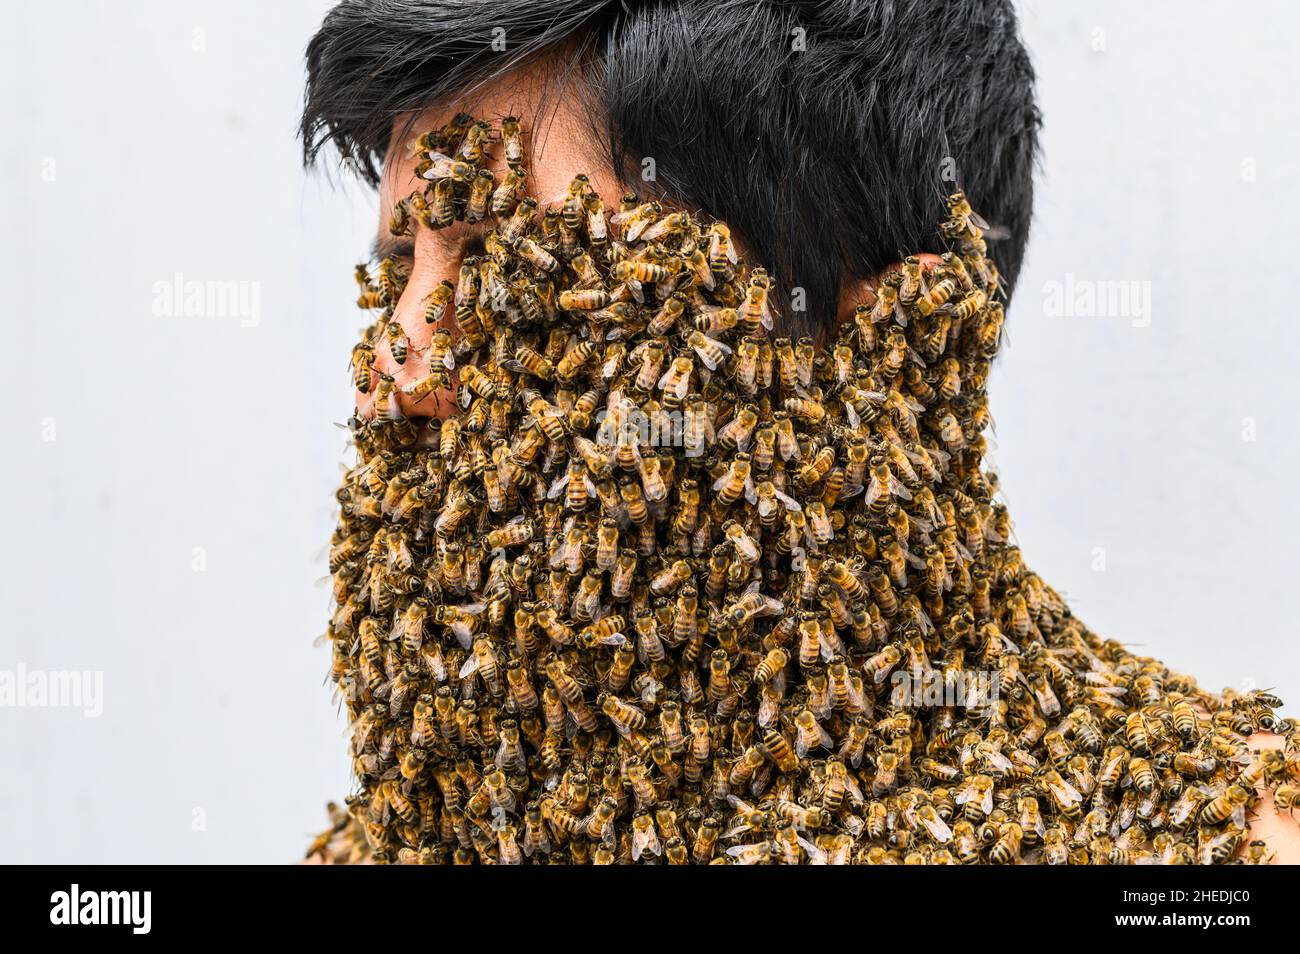 Man's face covered by bees Stock Photo